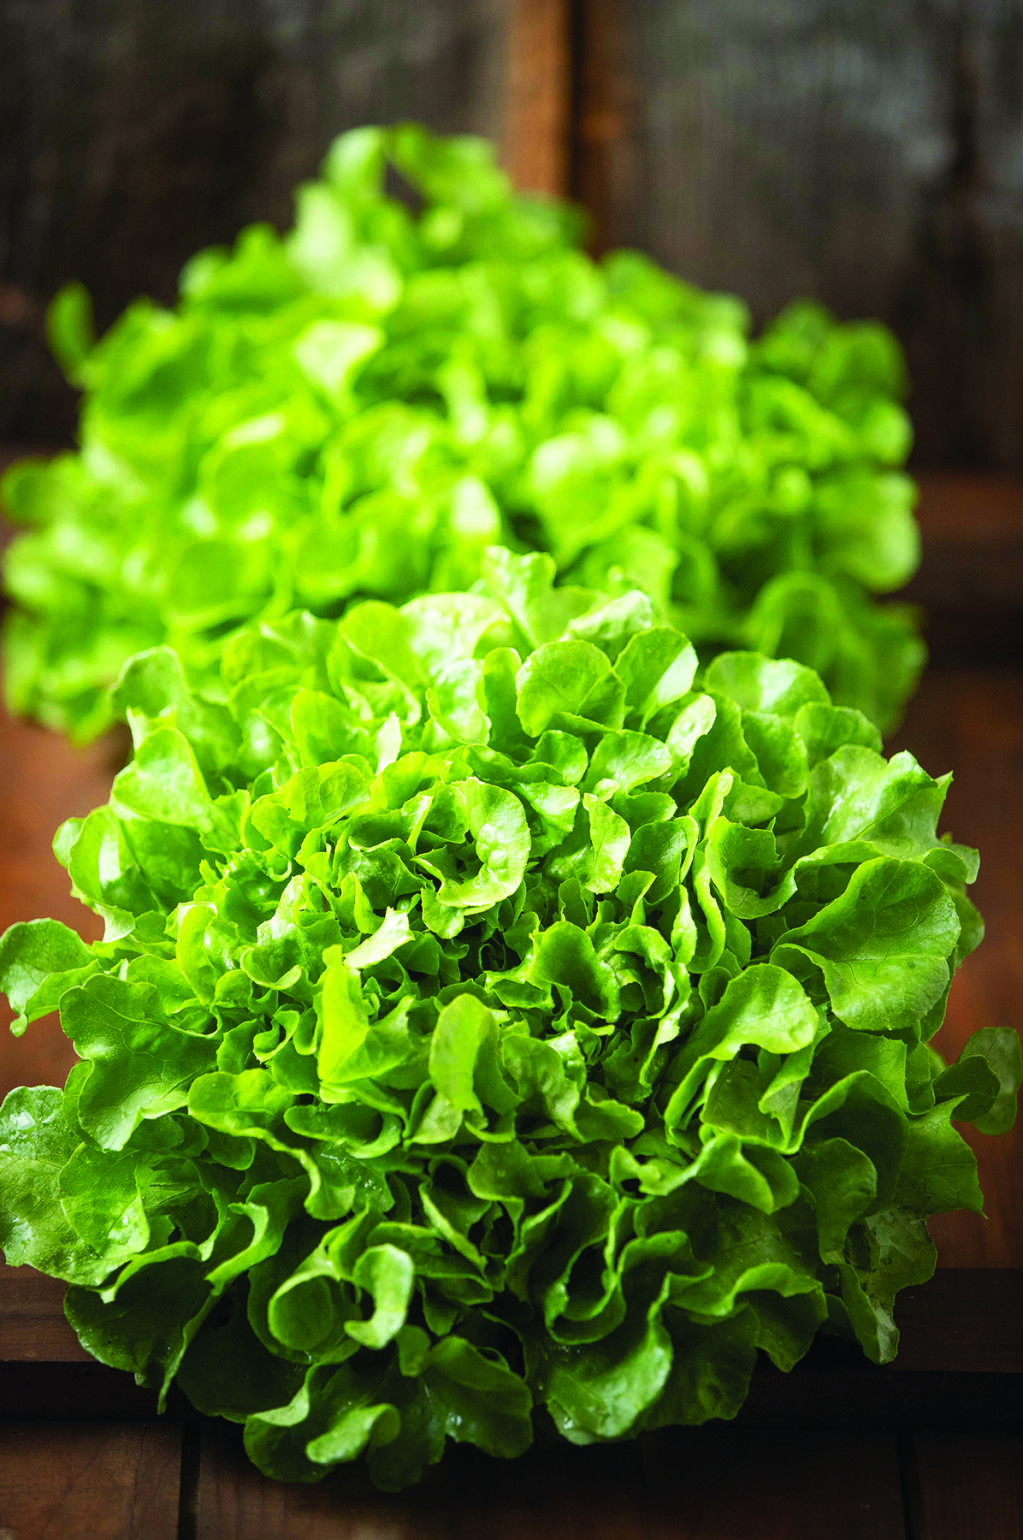 Lettuce ‘Bauer’ grows a head perfectly sized for a single serving salad (Johnnyseeds.com)